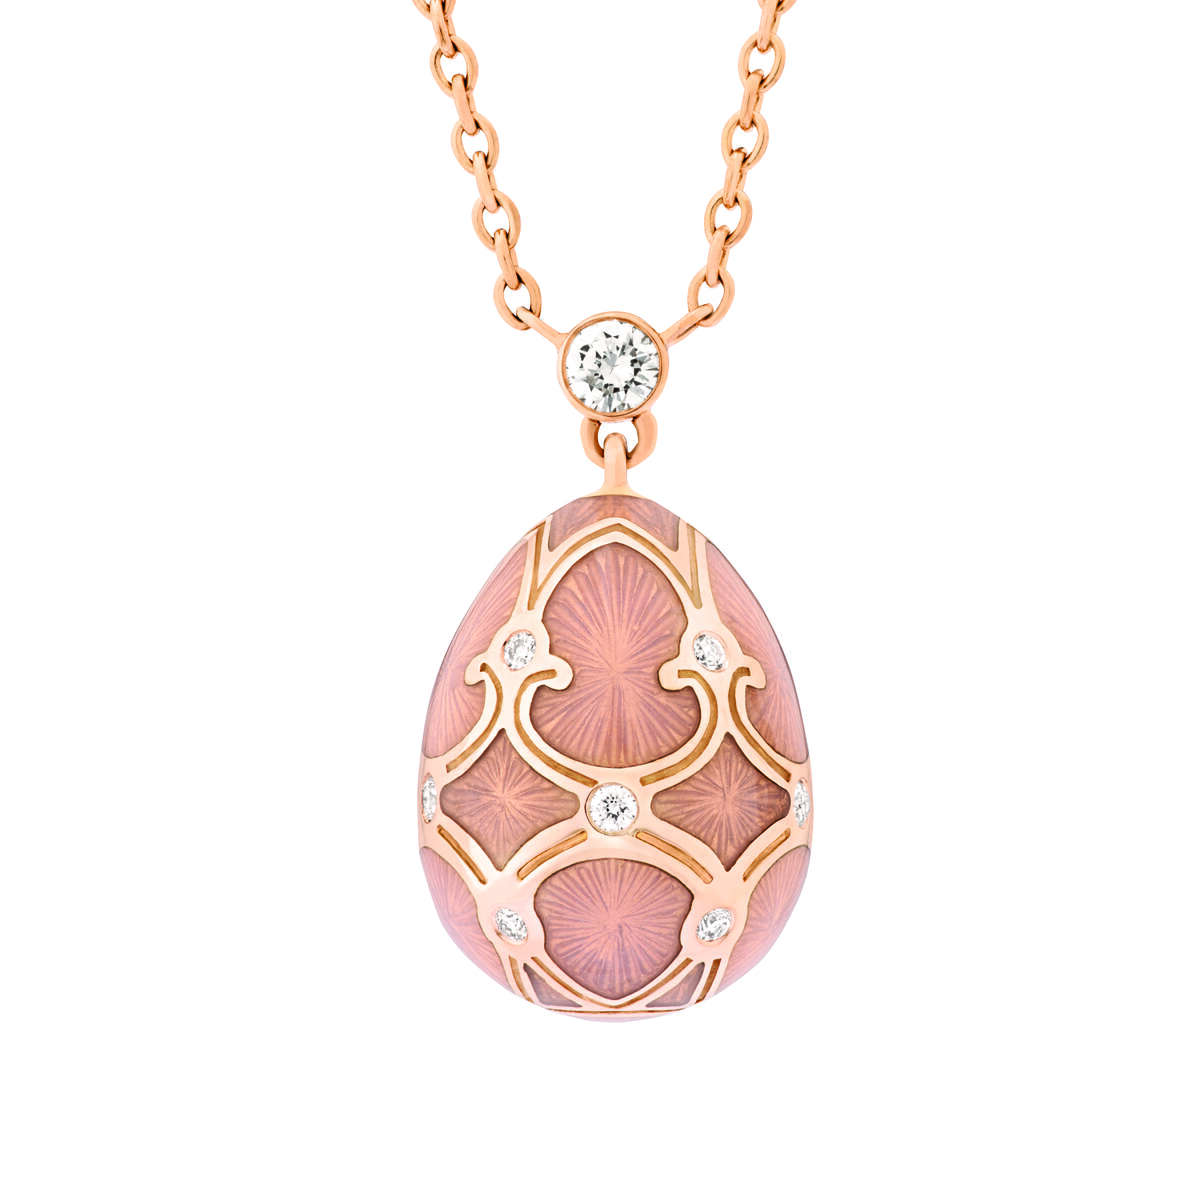 A Fabergé pendant from the Heritage collection.